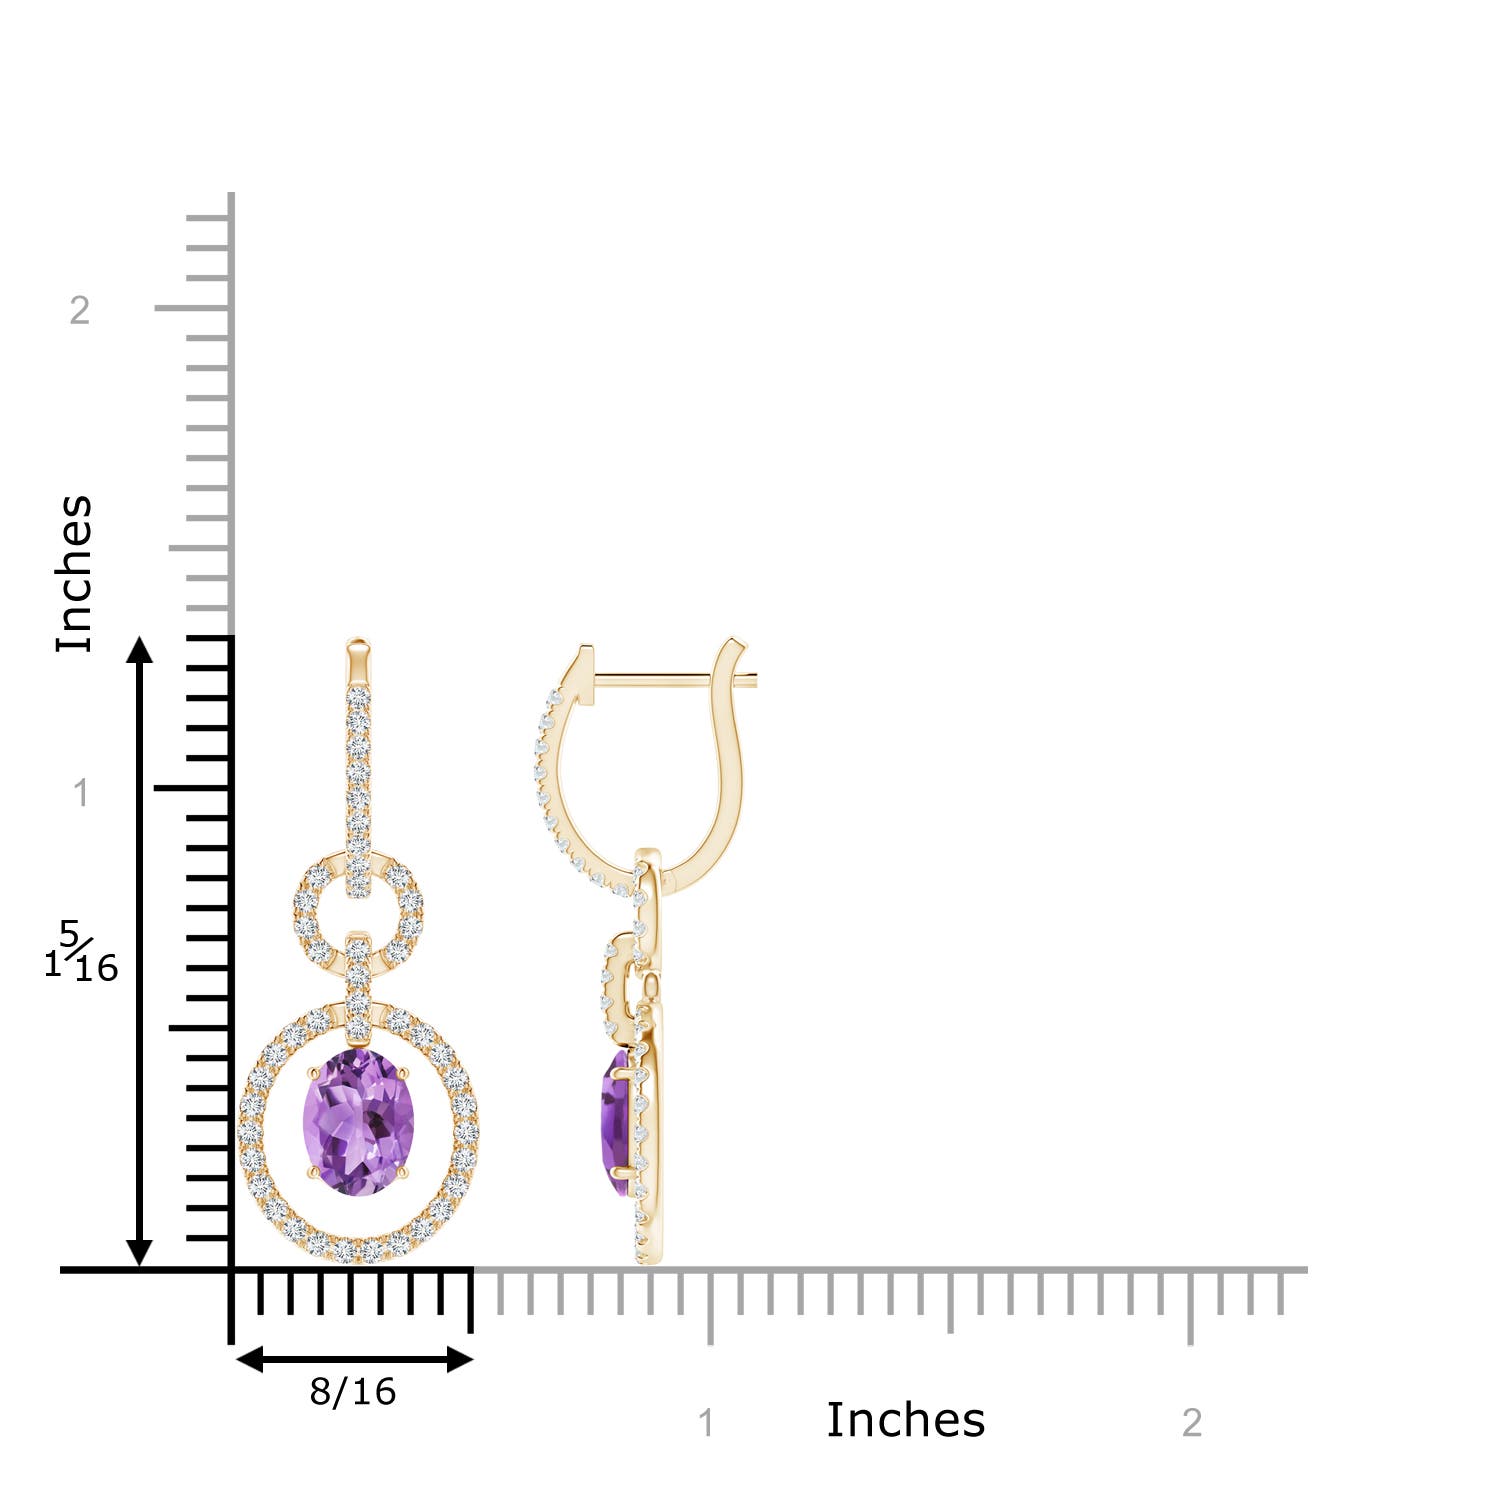 A - Amethyst / 3.08 CT / 14 KT Yellow Gold